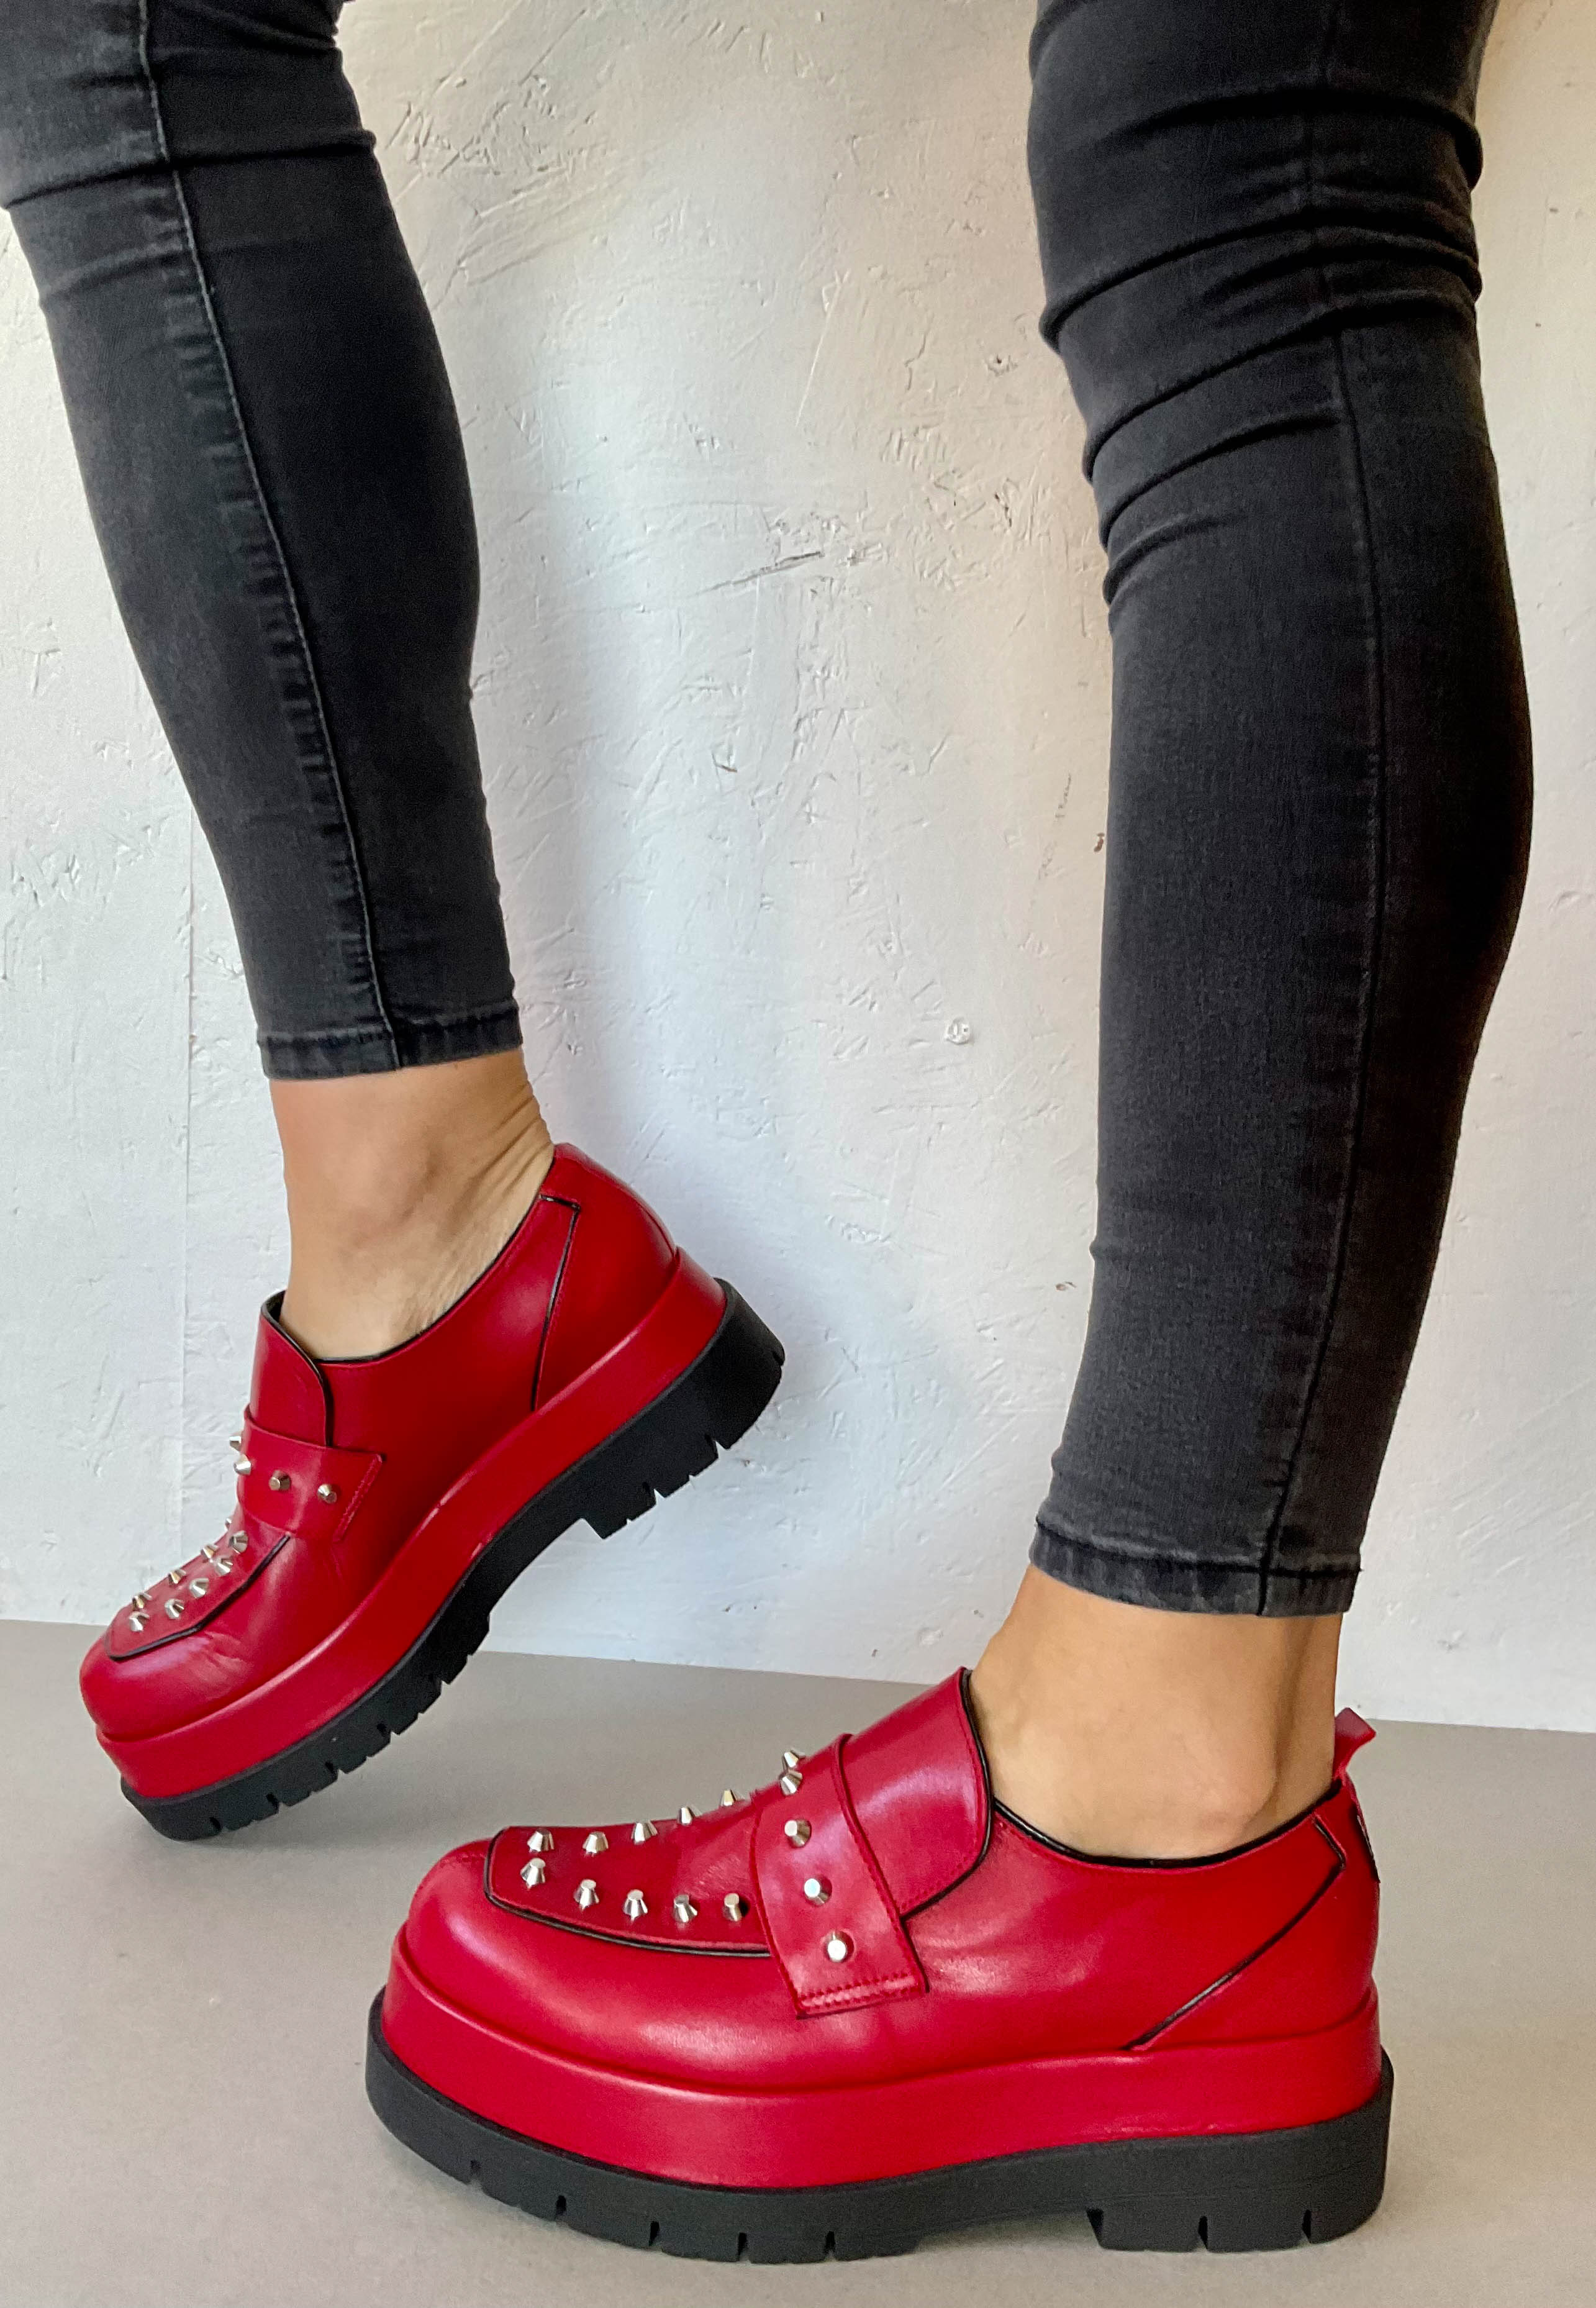 Marco moreo red platform shoes